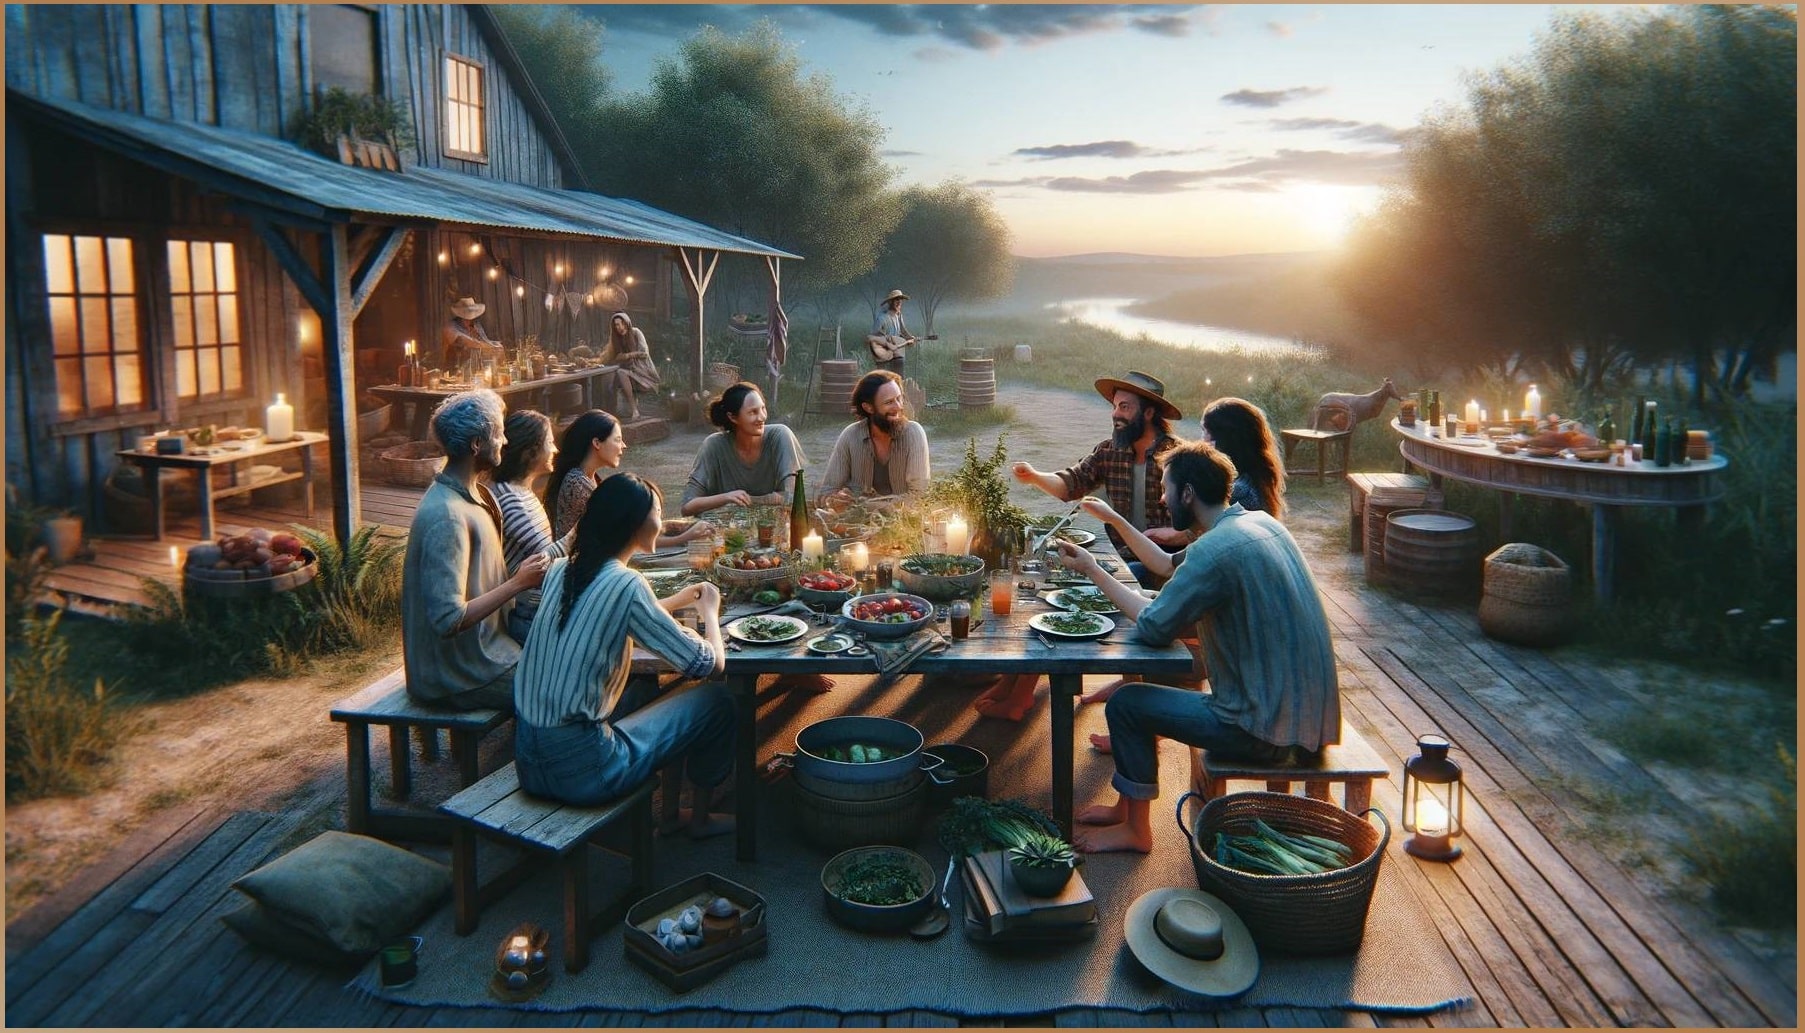 A rustic communal dinner at dusk, where a group of friends and family engage in meaningful conversations, embodying the slow life principles of deep connections and shared experiences.